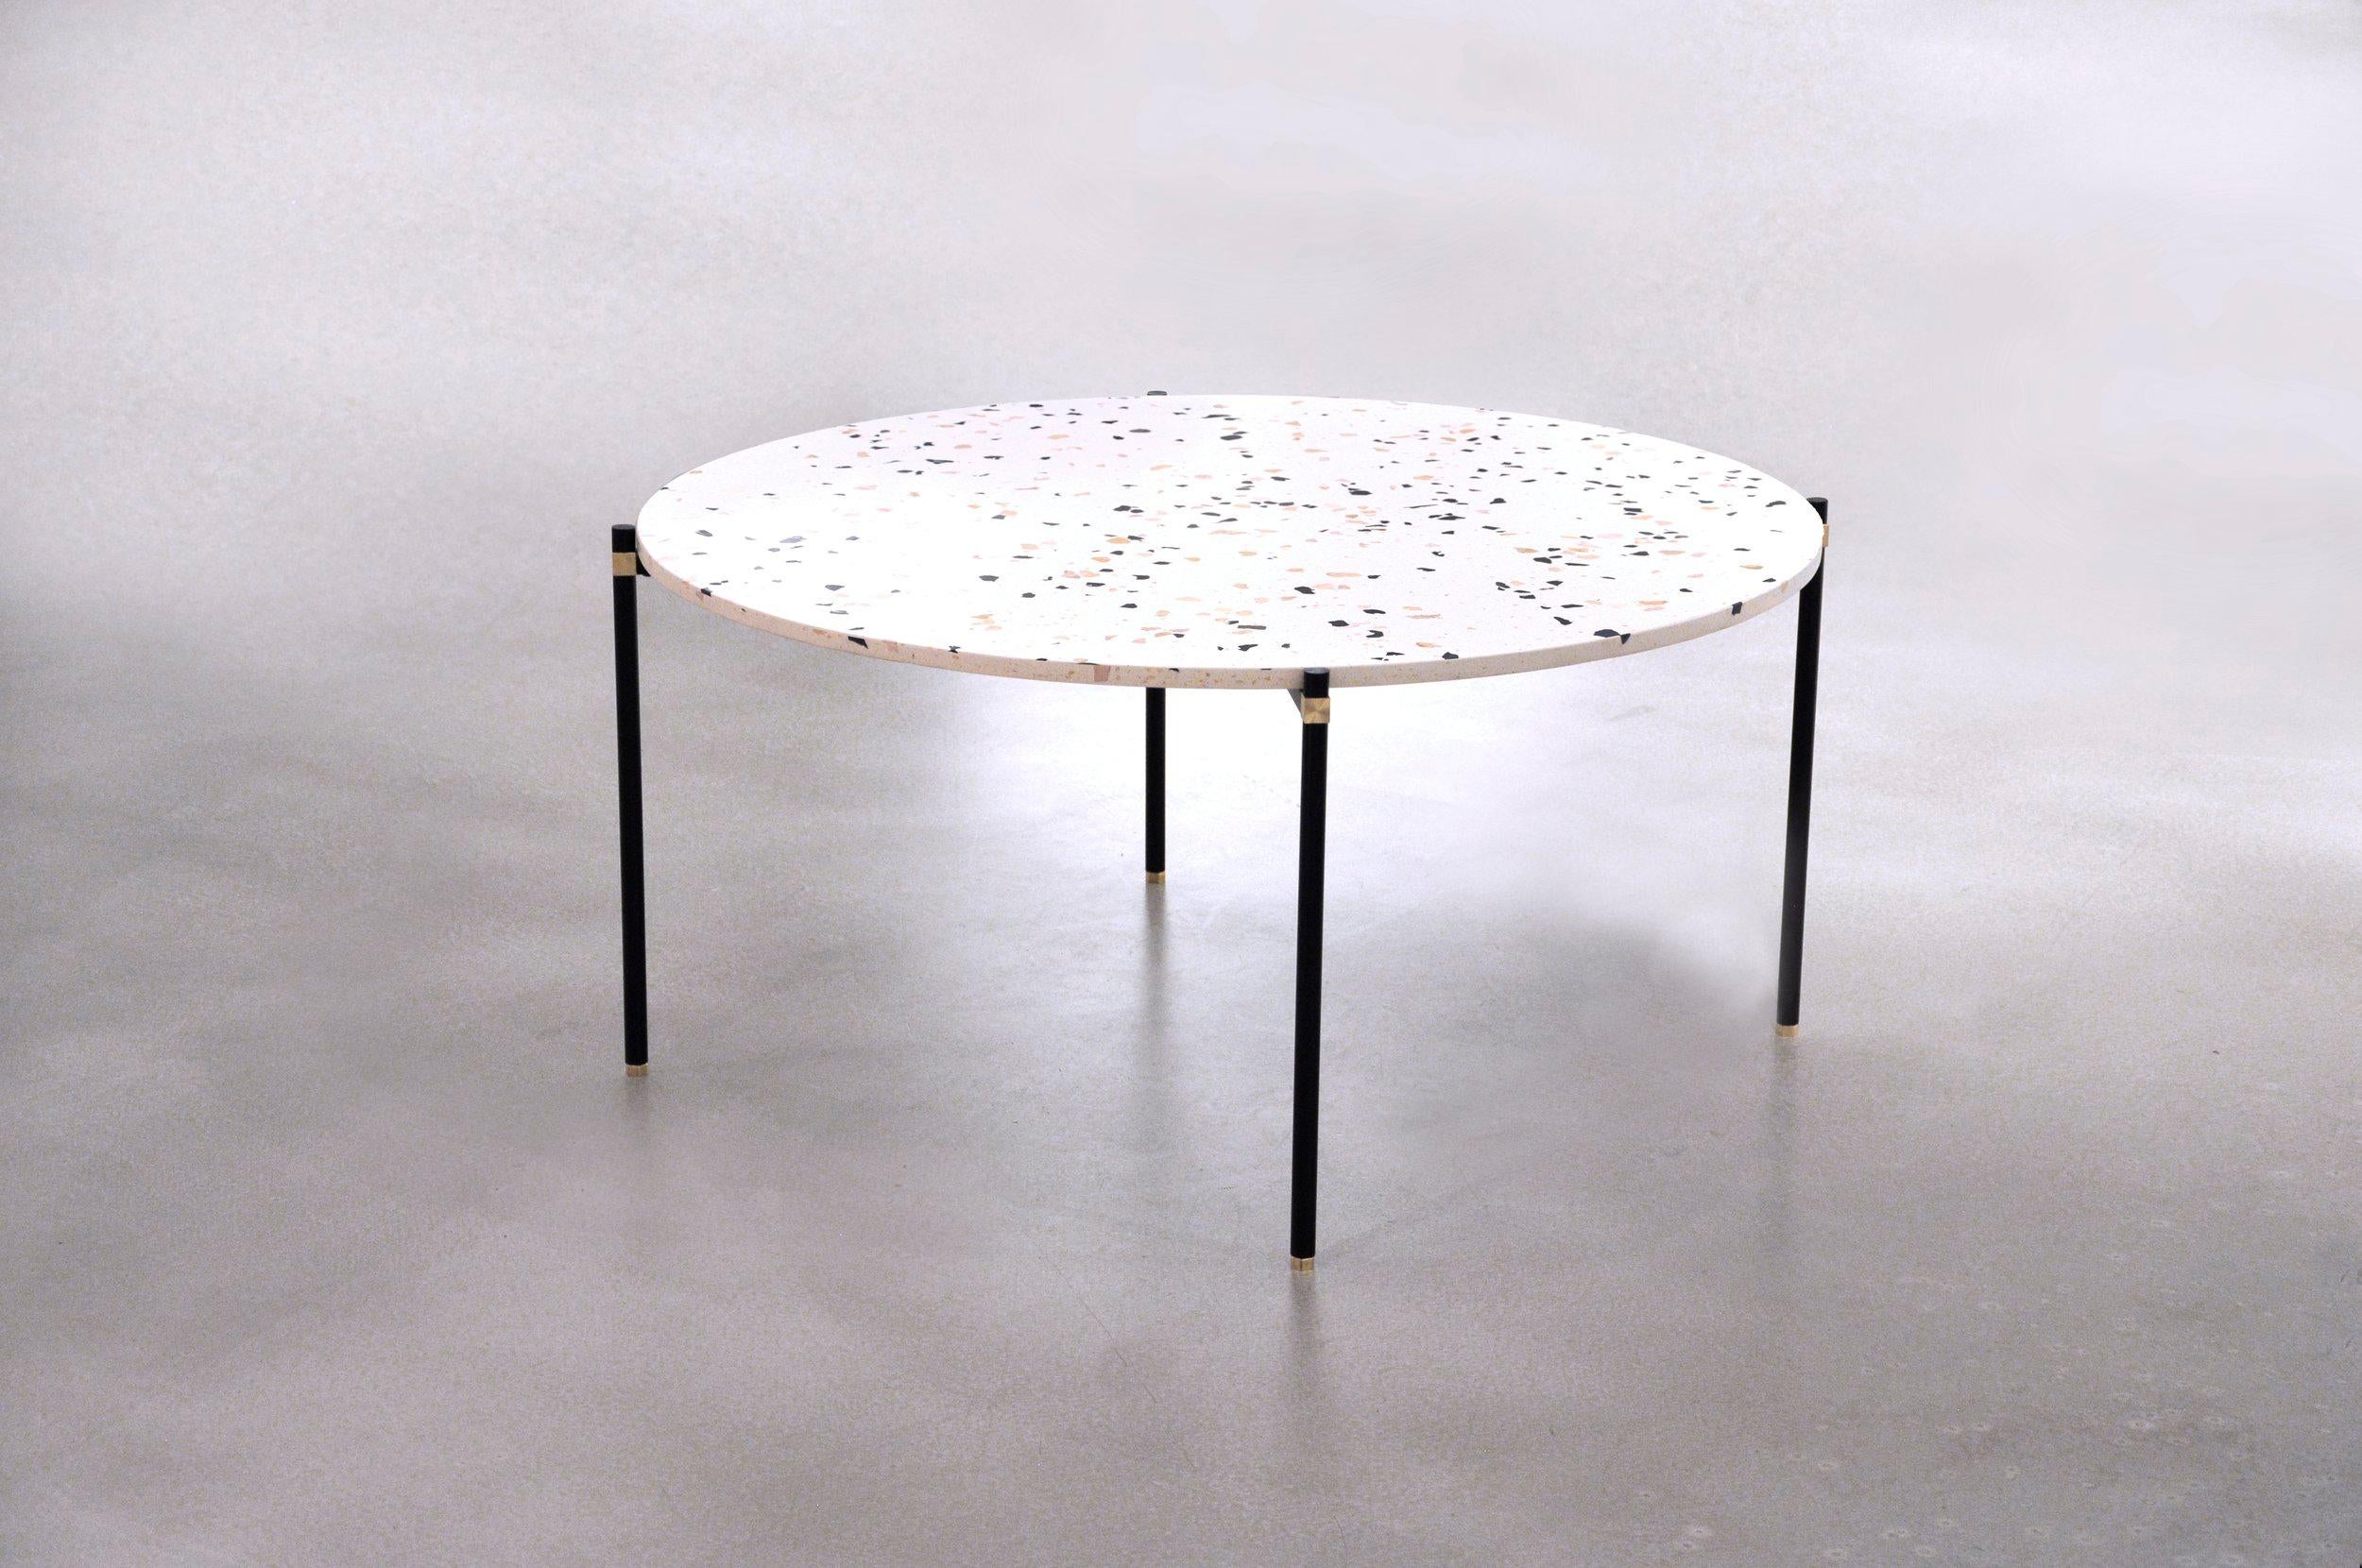 Simple coffee table 100 4 legs by Contain
Dimensions: D 100 x H 51 cm 
Materials: Iron, brass, Terrazzo, marble, stone.
Available in different finishes and dimensions.

The Connector furniture collection is based on single assembly pieces that